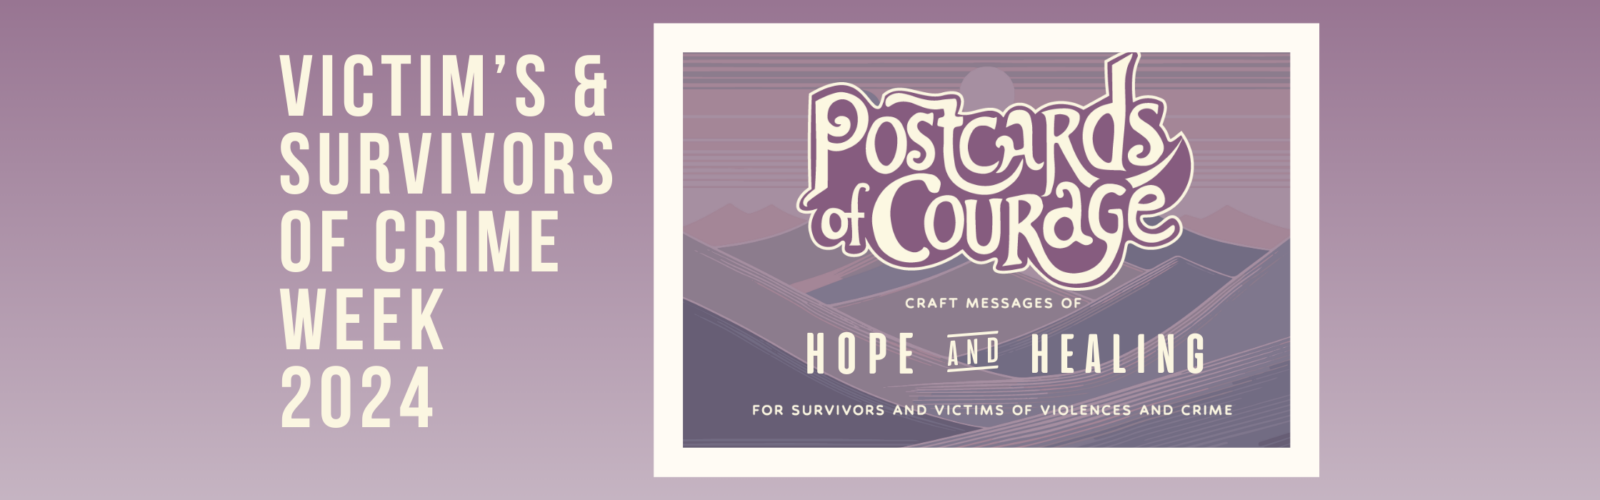 Text image to describe the theme of the blog, which is "Postcards of Courage │ Victims and Survivors of Crime Week 2024"